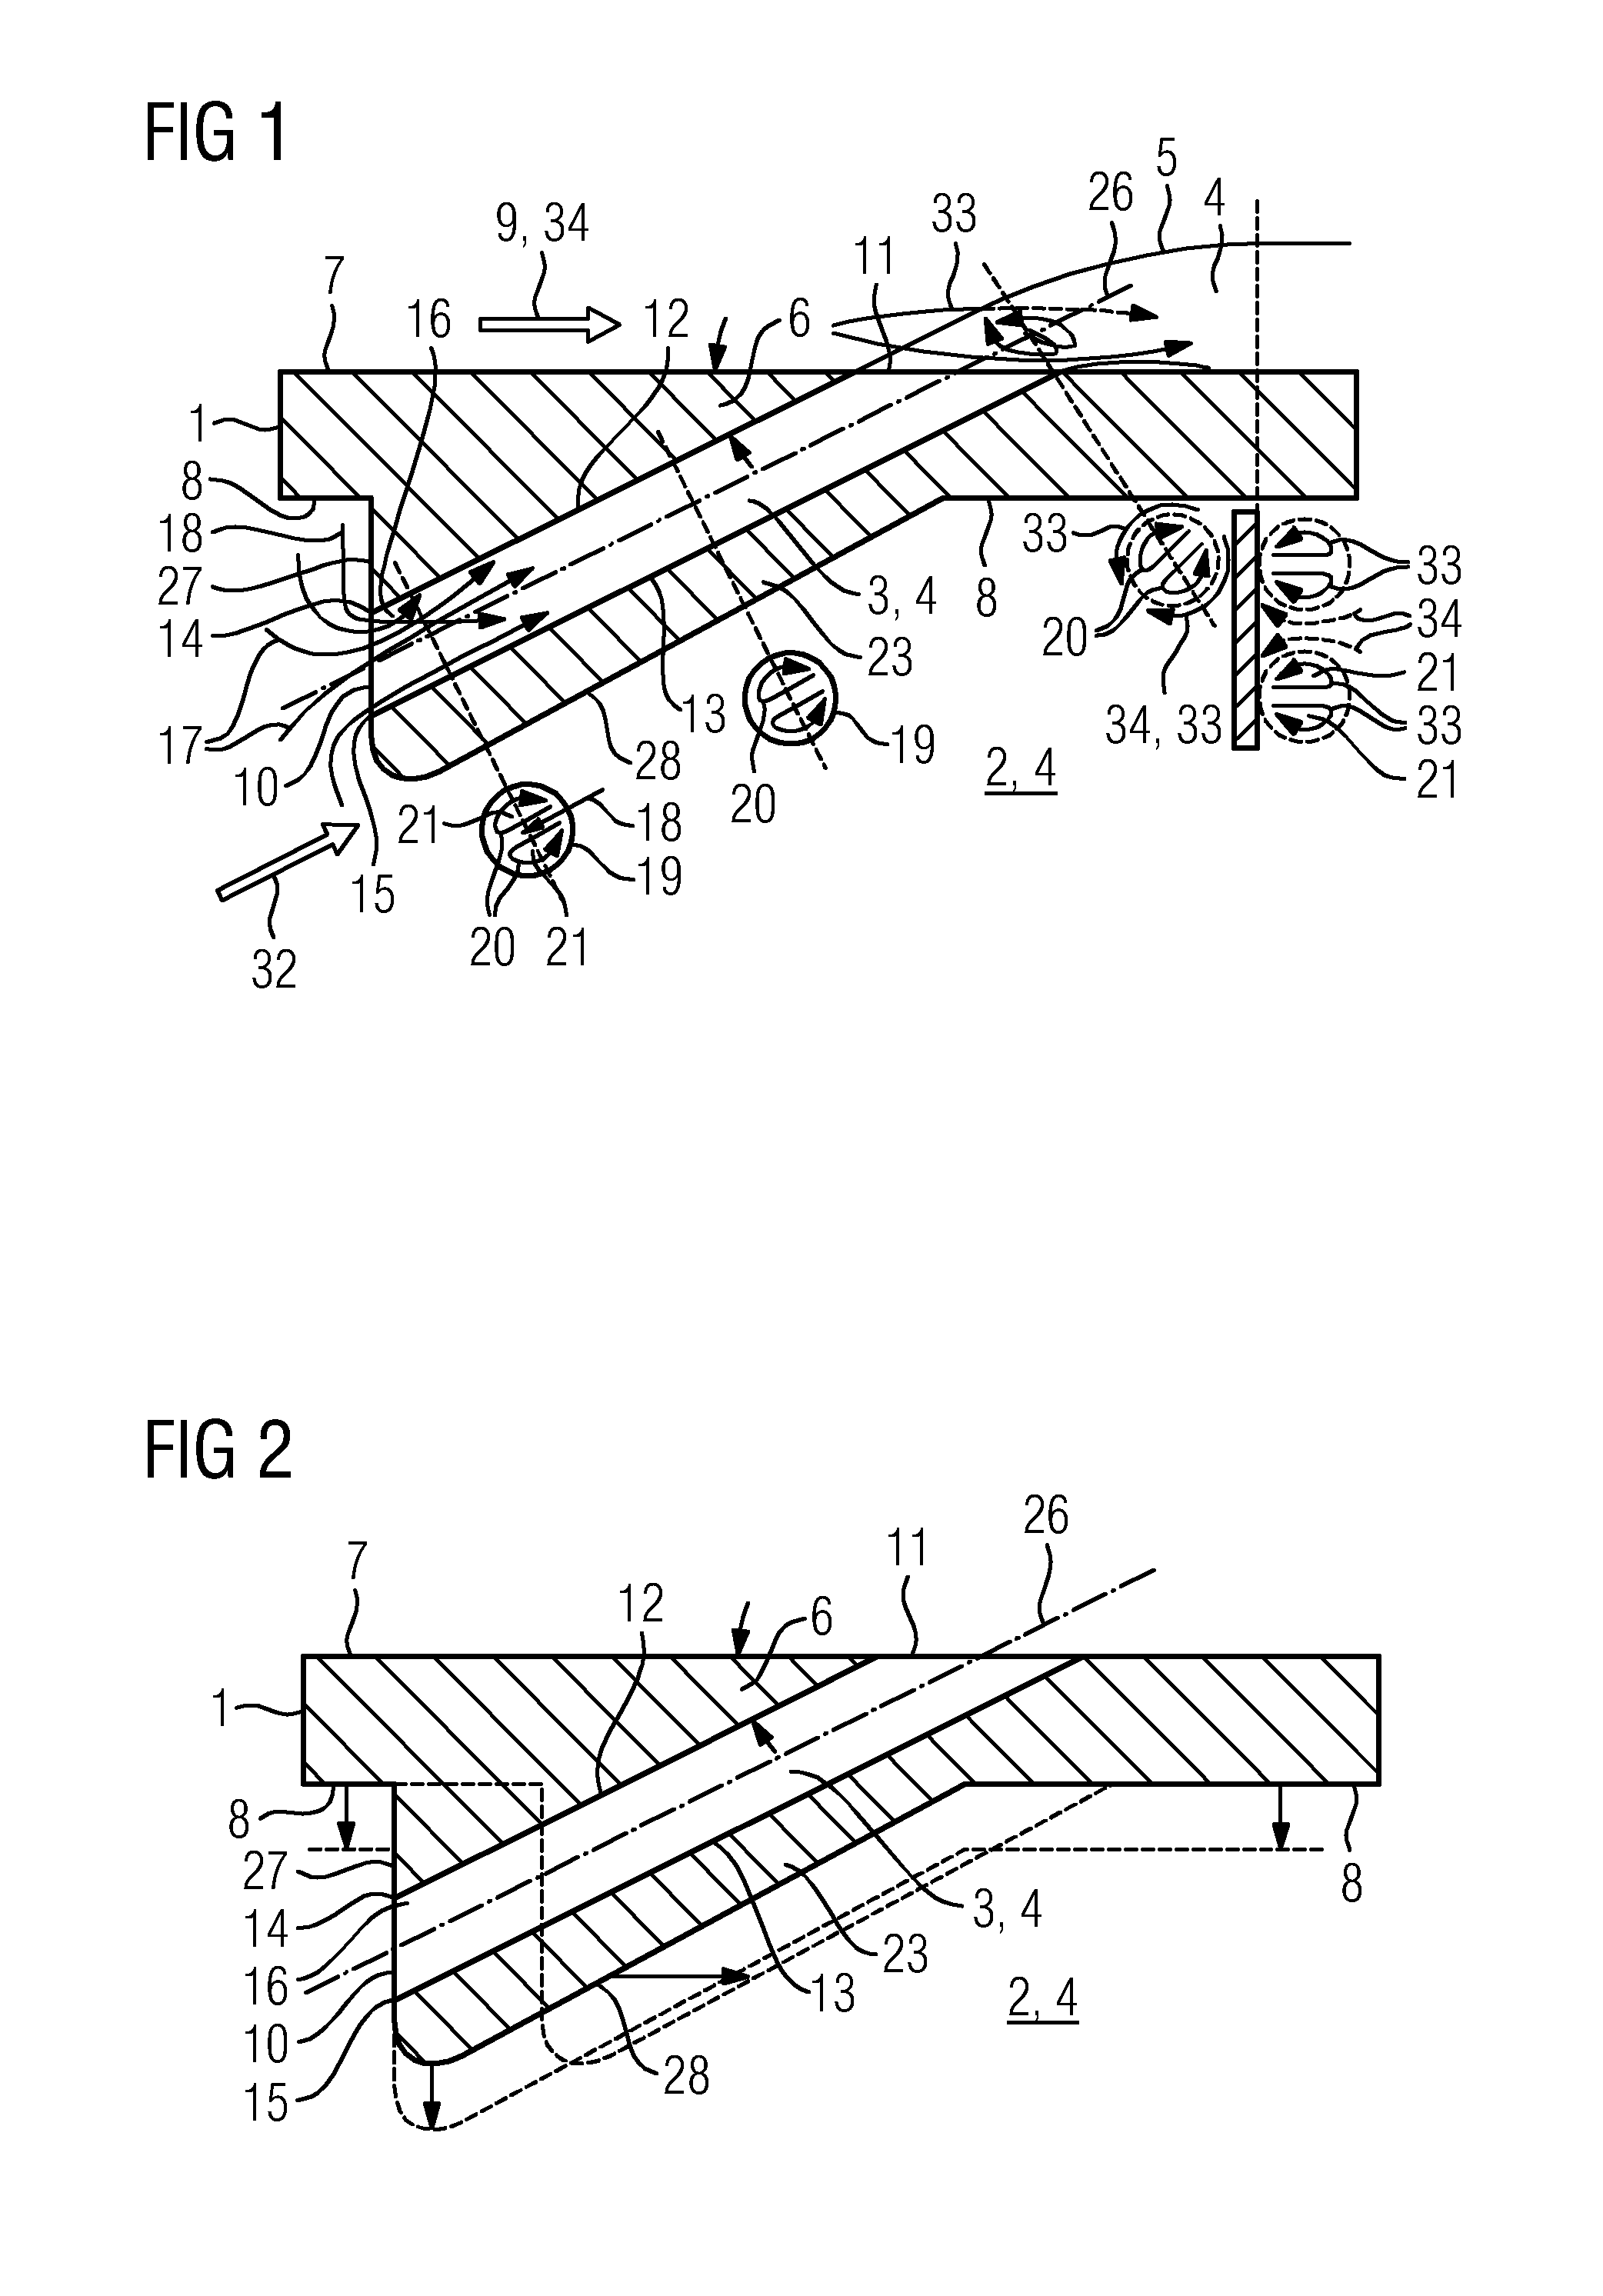 Film-cooled turbine blade for a turbomachine